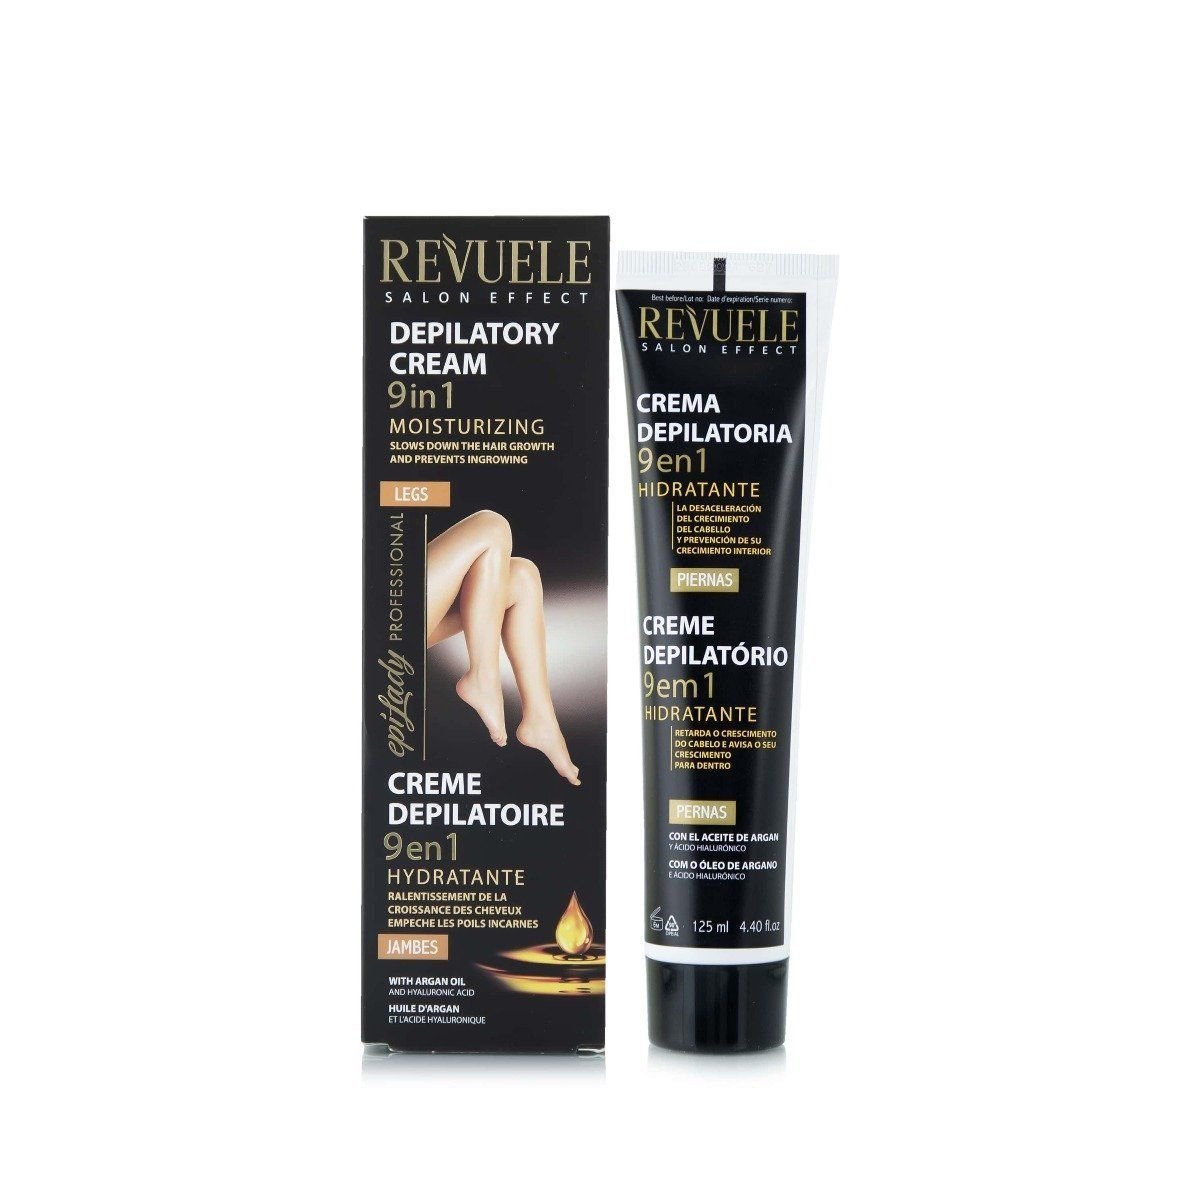 Revuele 9 In 1 Moisturizing Hair Removal Cream For Legs With Argan Oil & Hyaluronic Acid